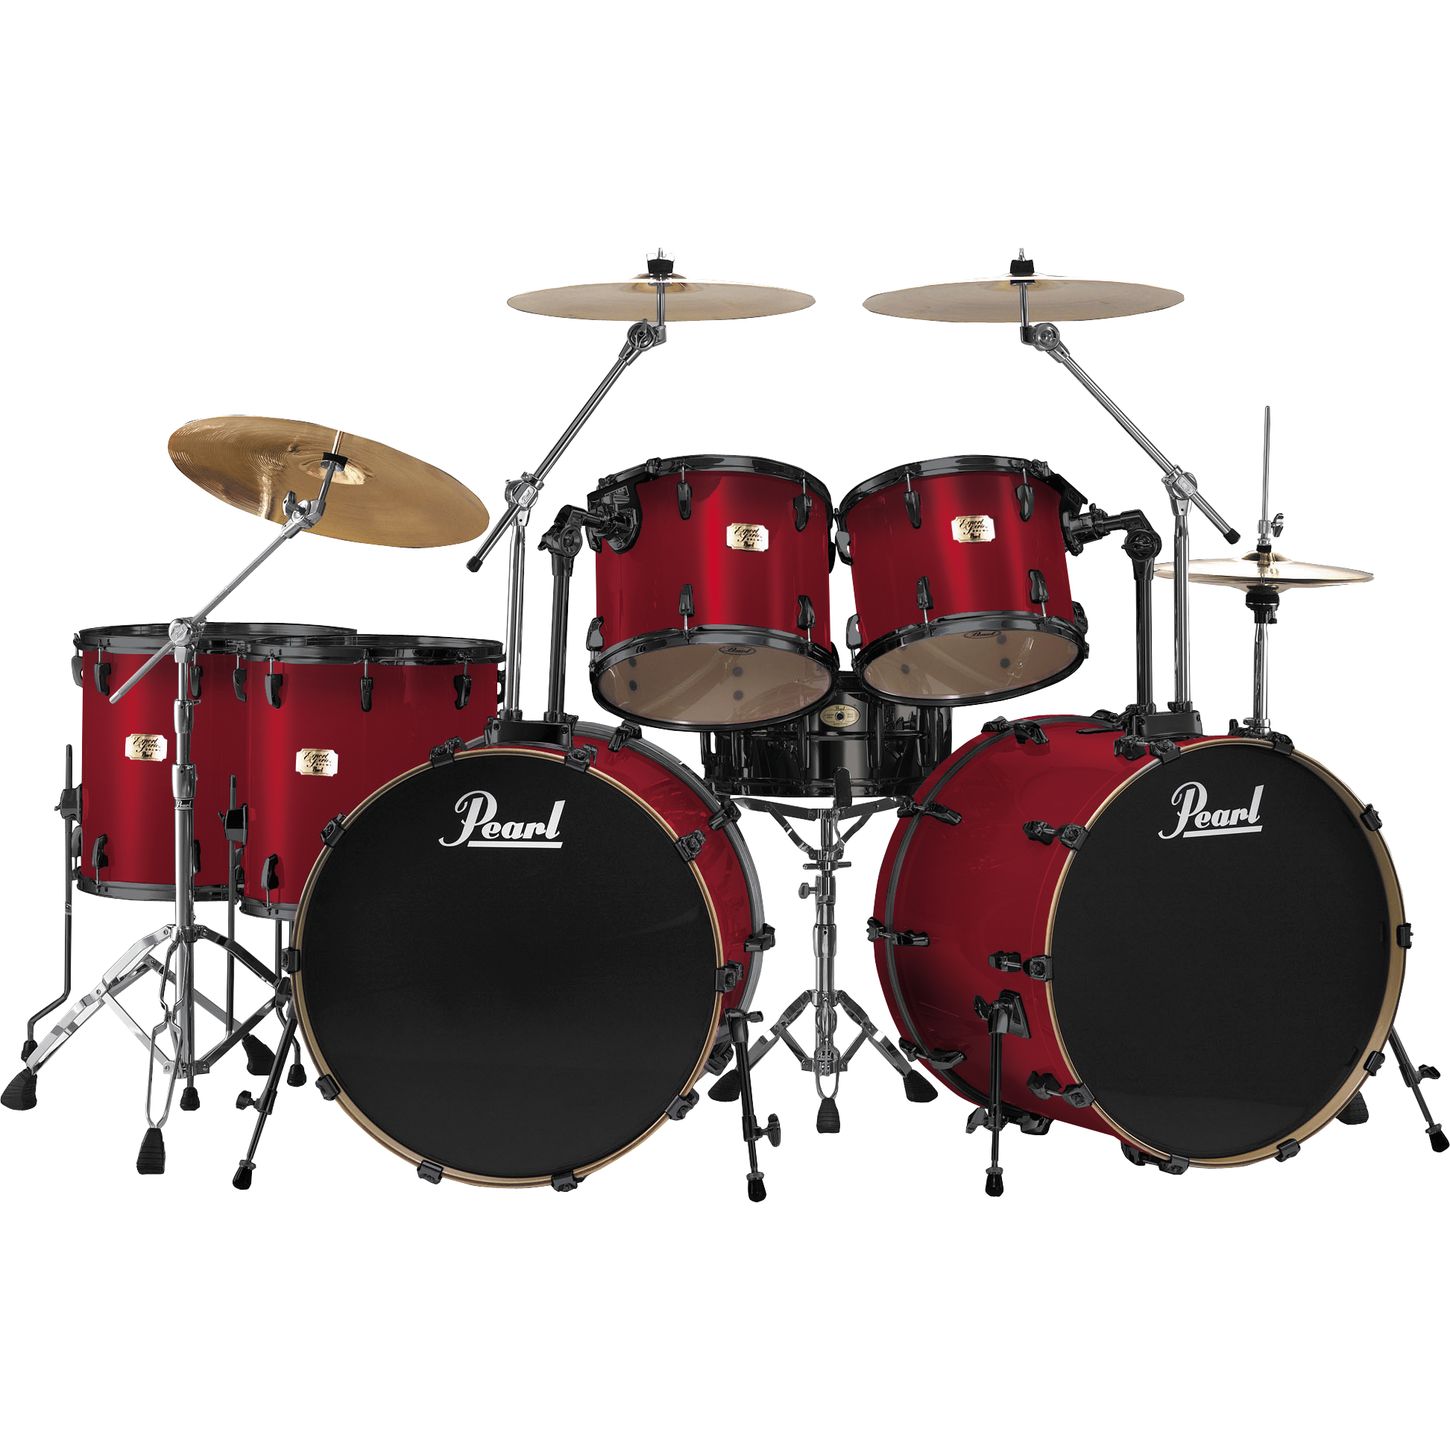 Pearl drums clipart 